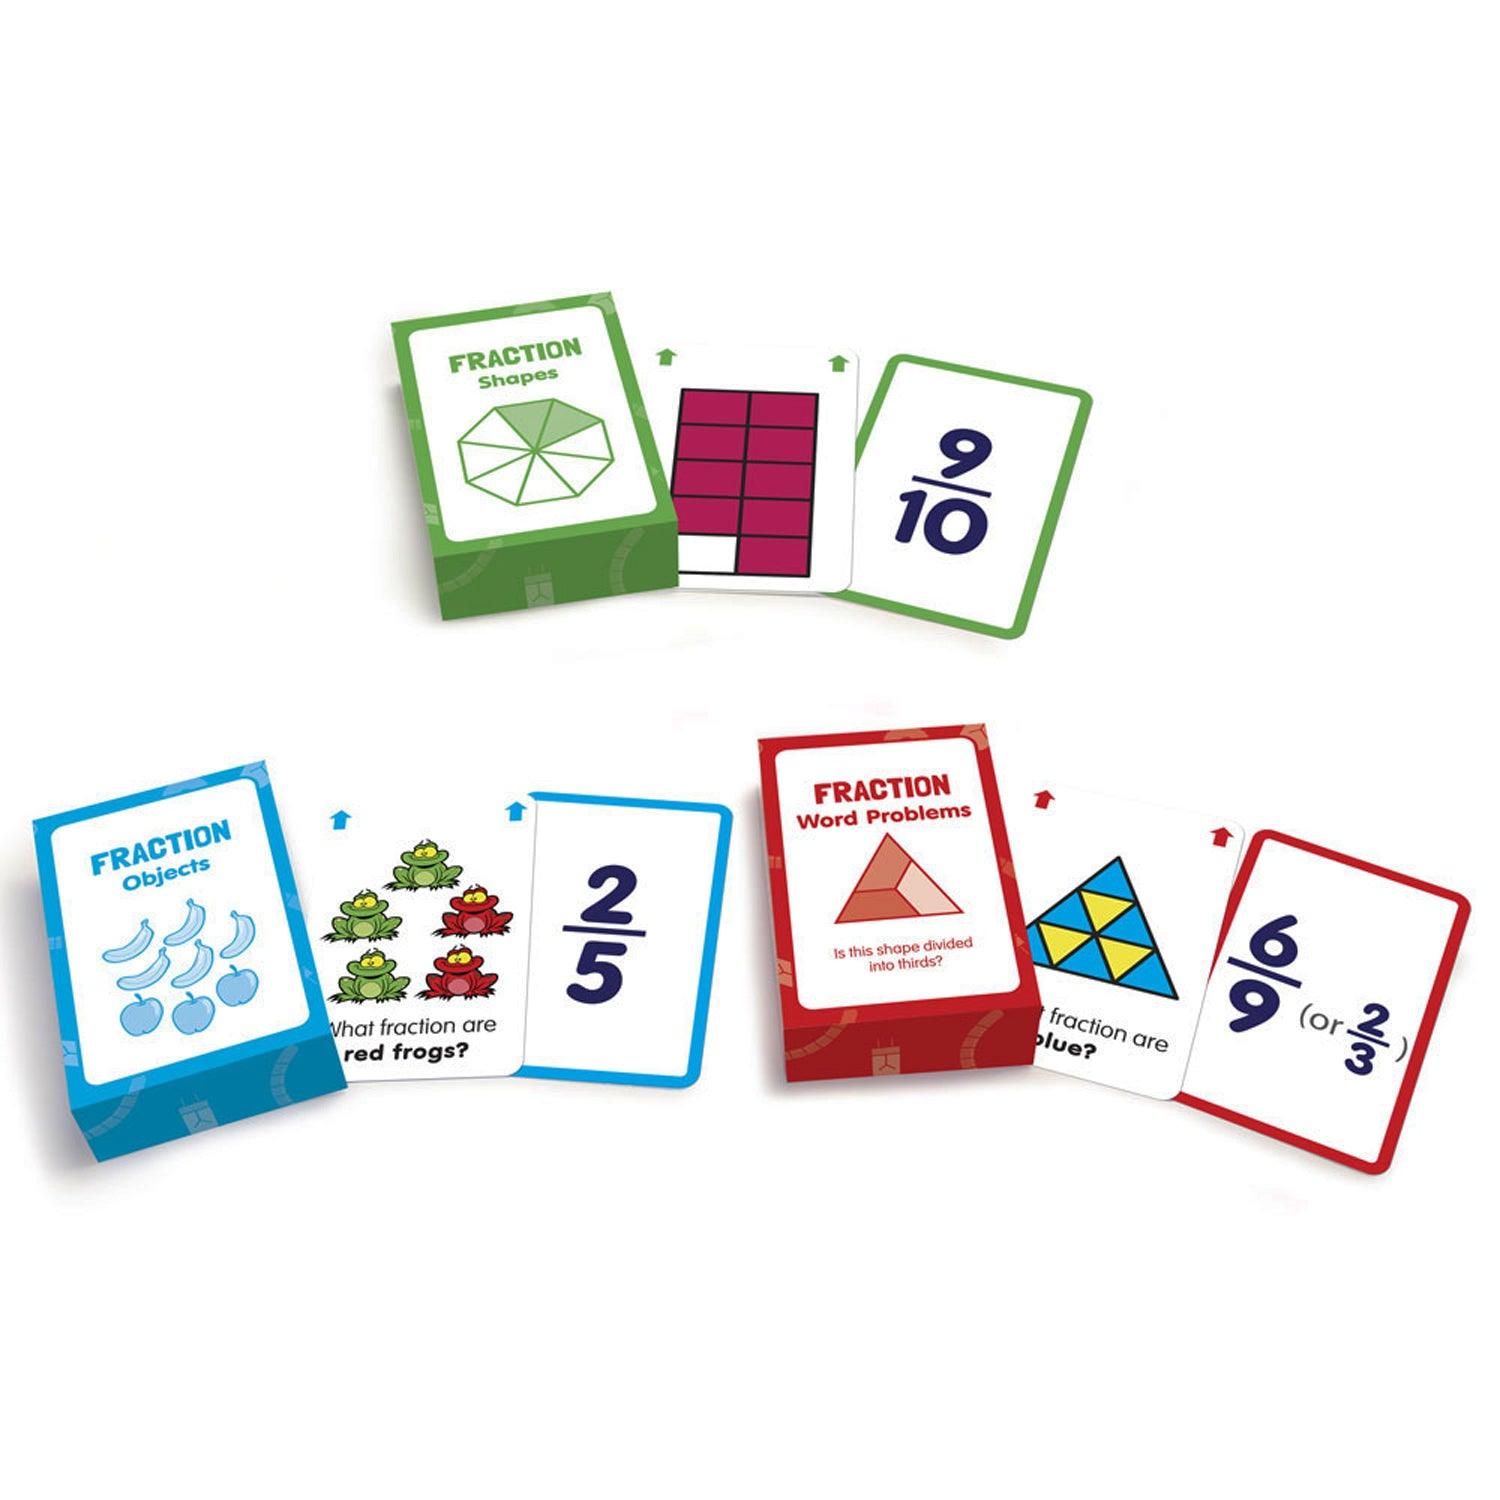 Fraction Flashcards, 3 Sets Per Pack, 3 Packs - Loomini